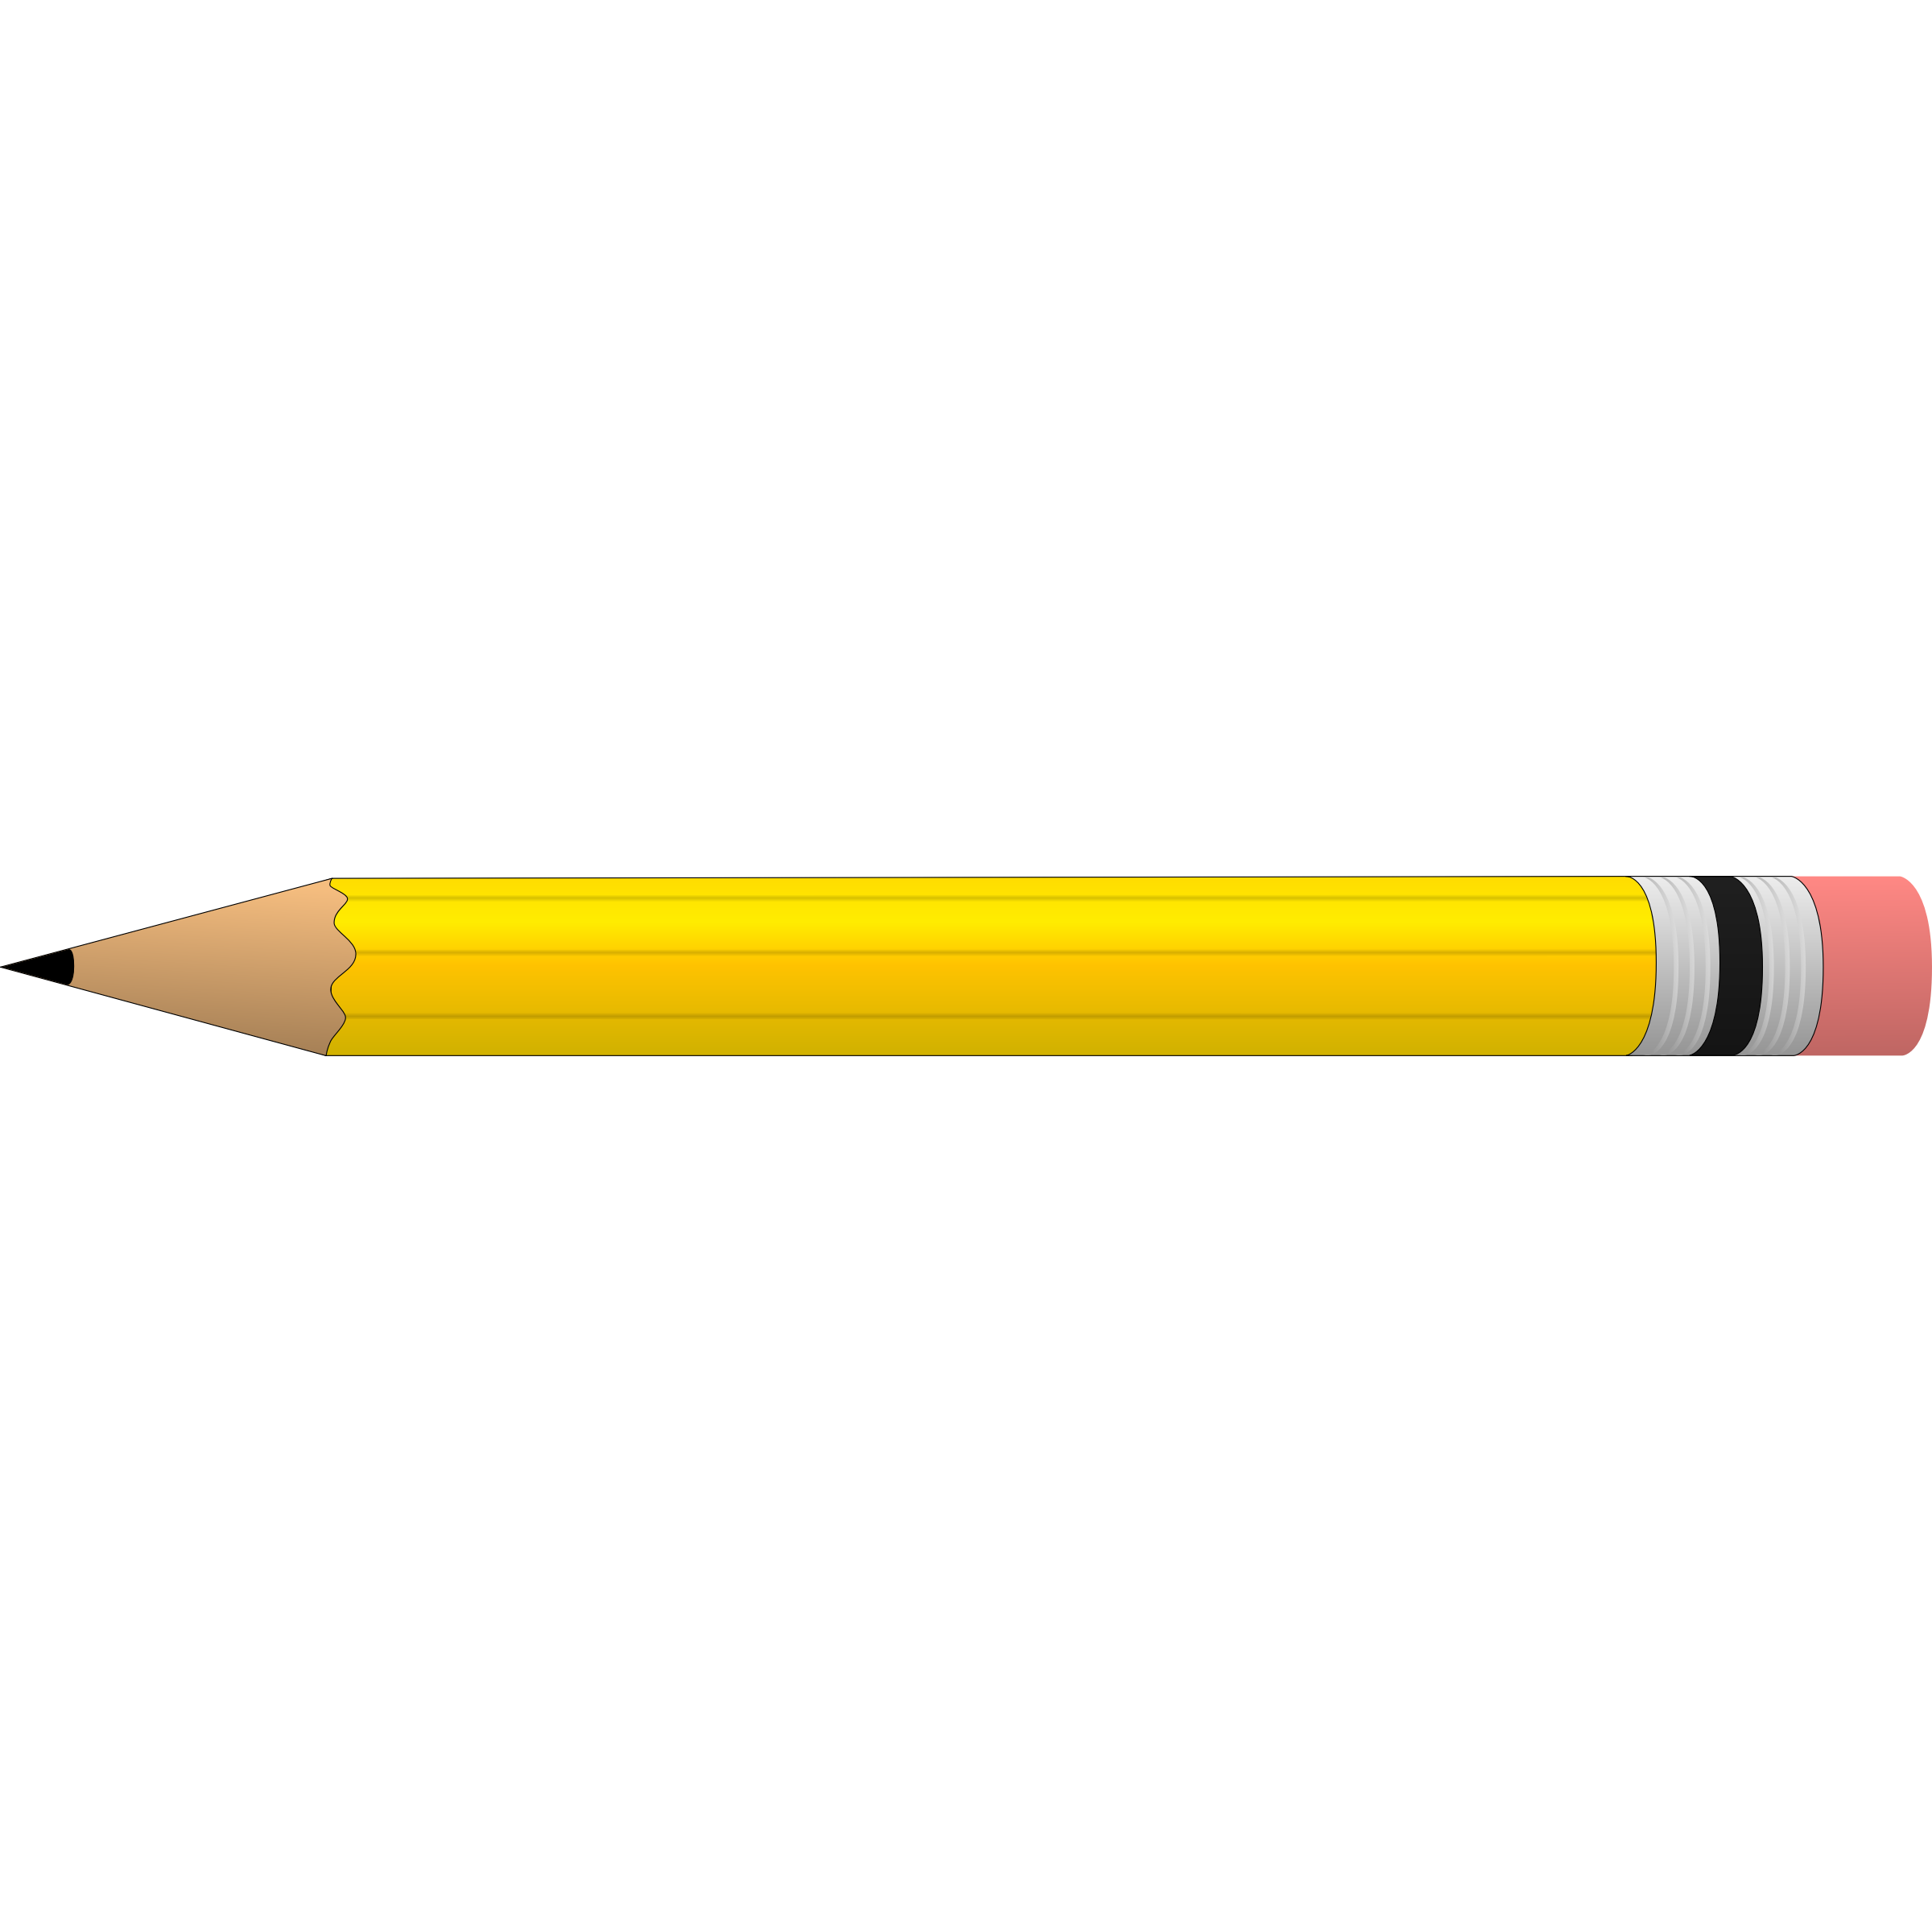 Top Pencil For Clip Art Free Clipart Image - Dull Pencil, Transparent background PNG HD thumbnail